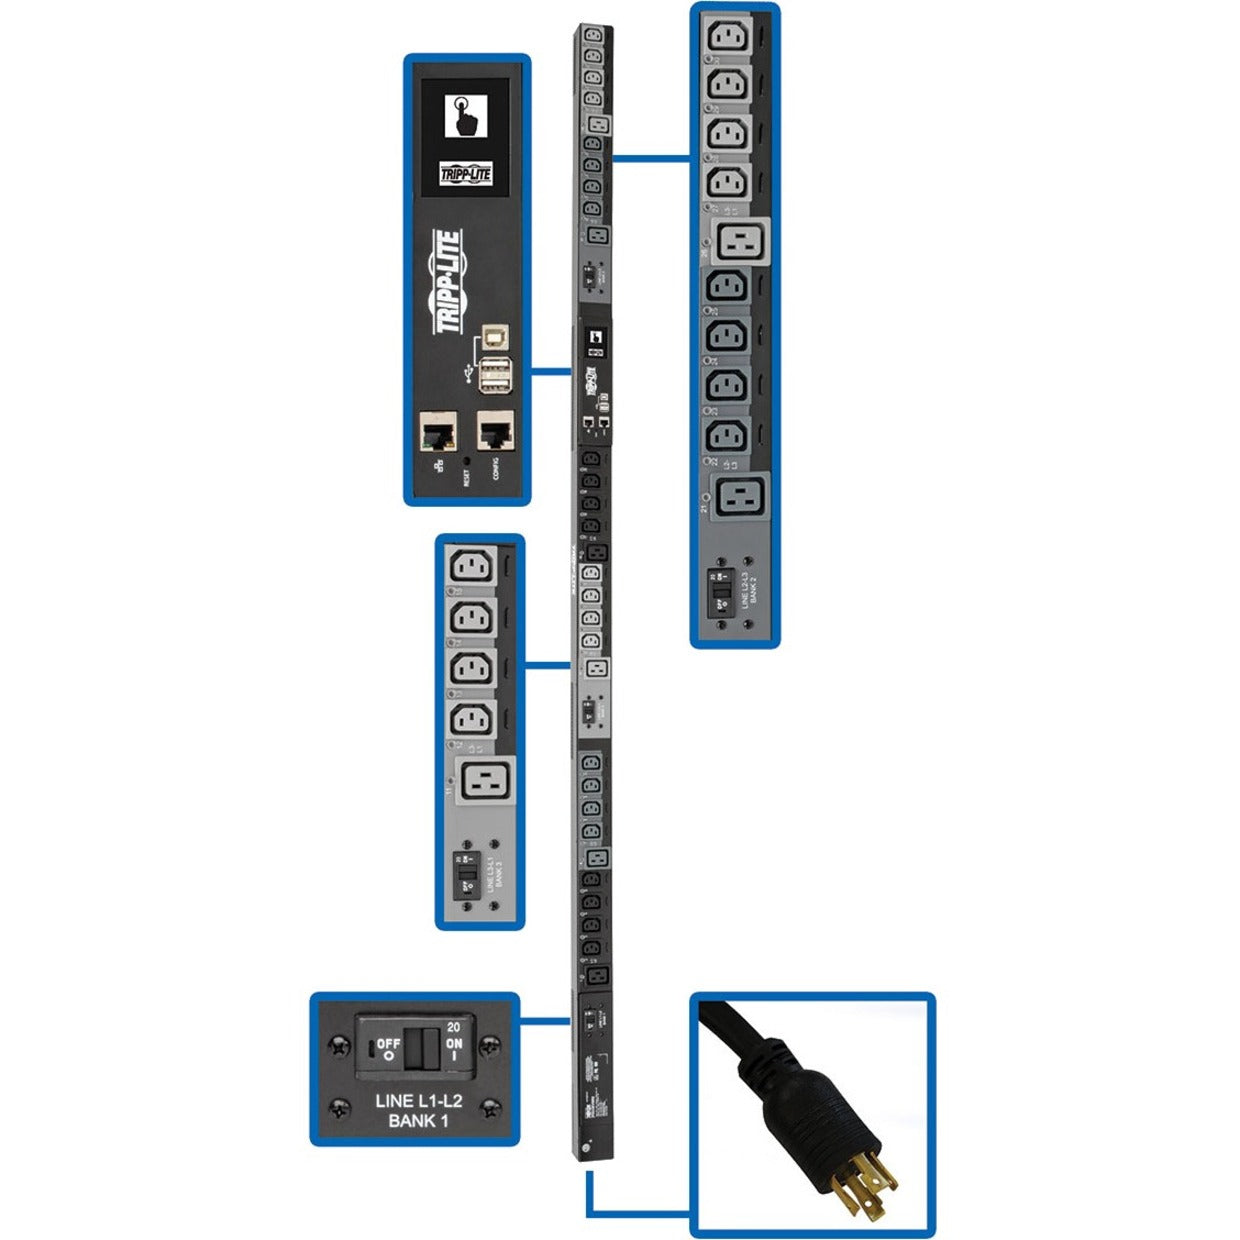 Tripp Lite PDU3EVSR6L2130 30-Outlet PDU, 10 kW Power Rating, Three Phase, Switched, Overload Protection